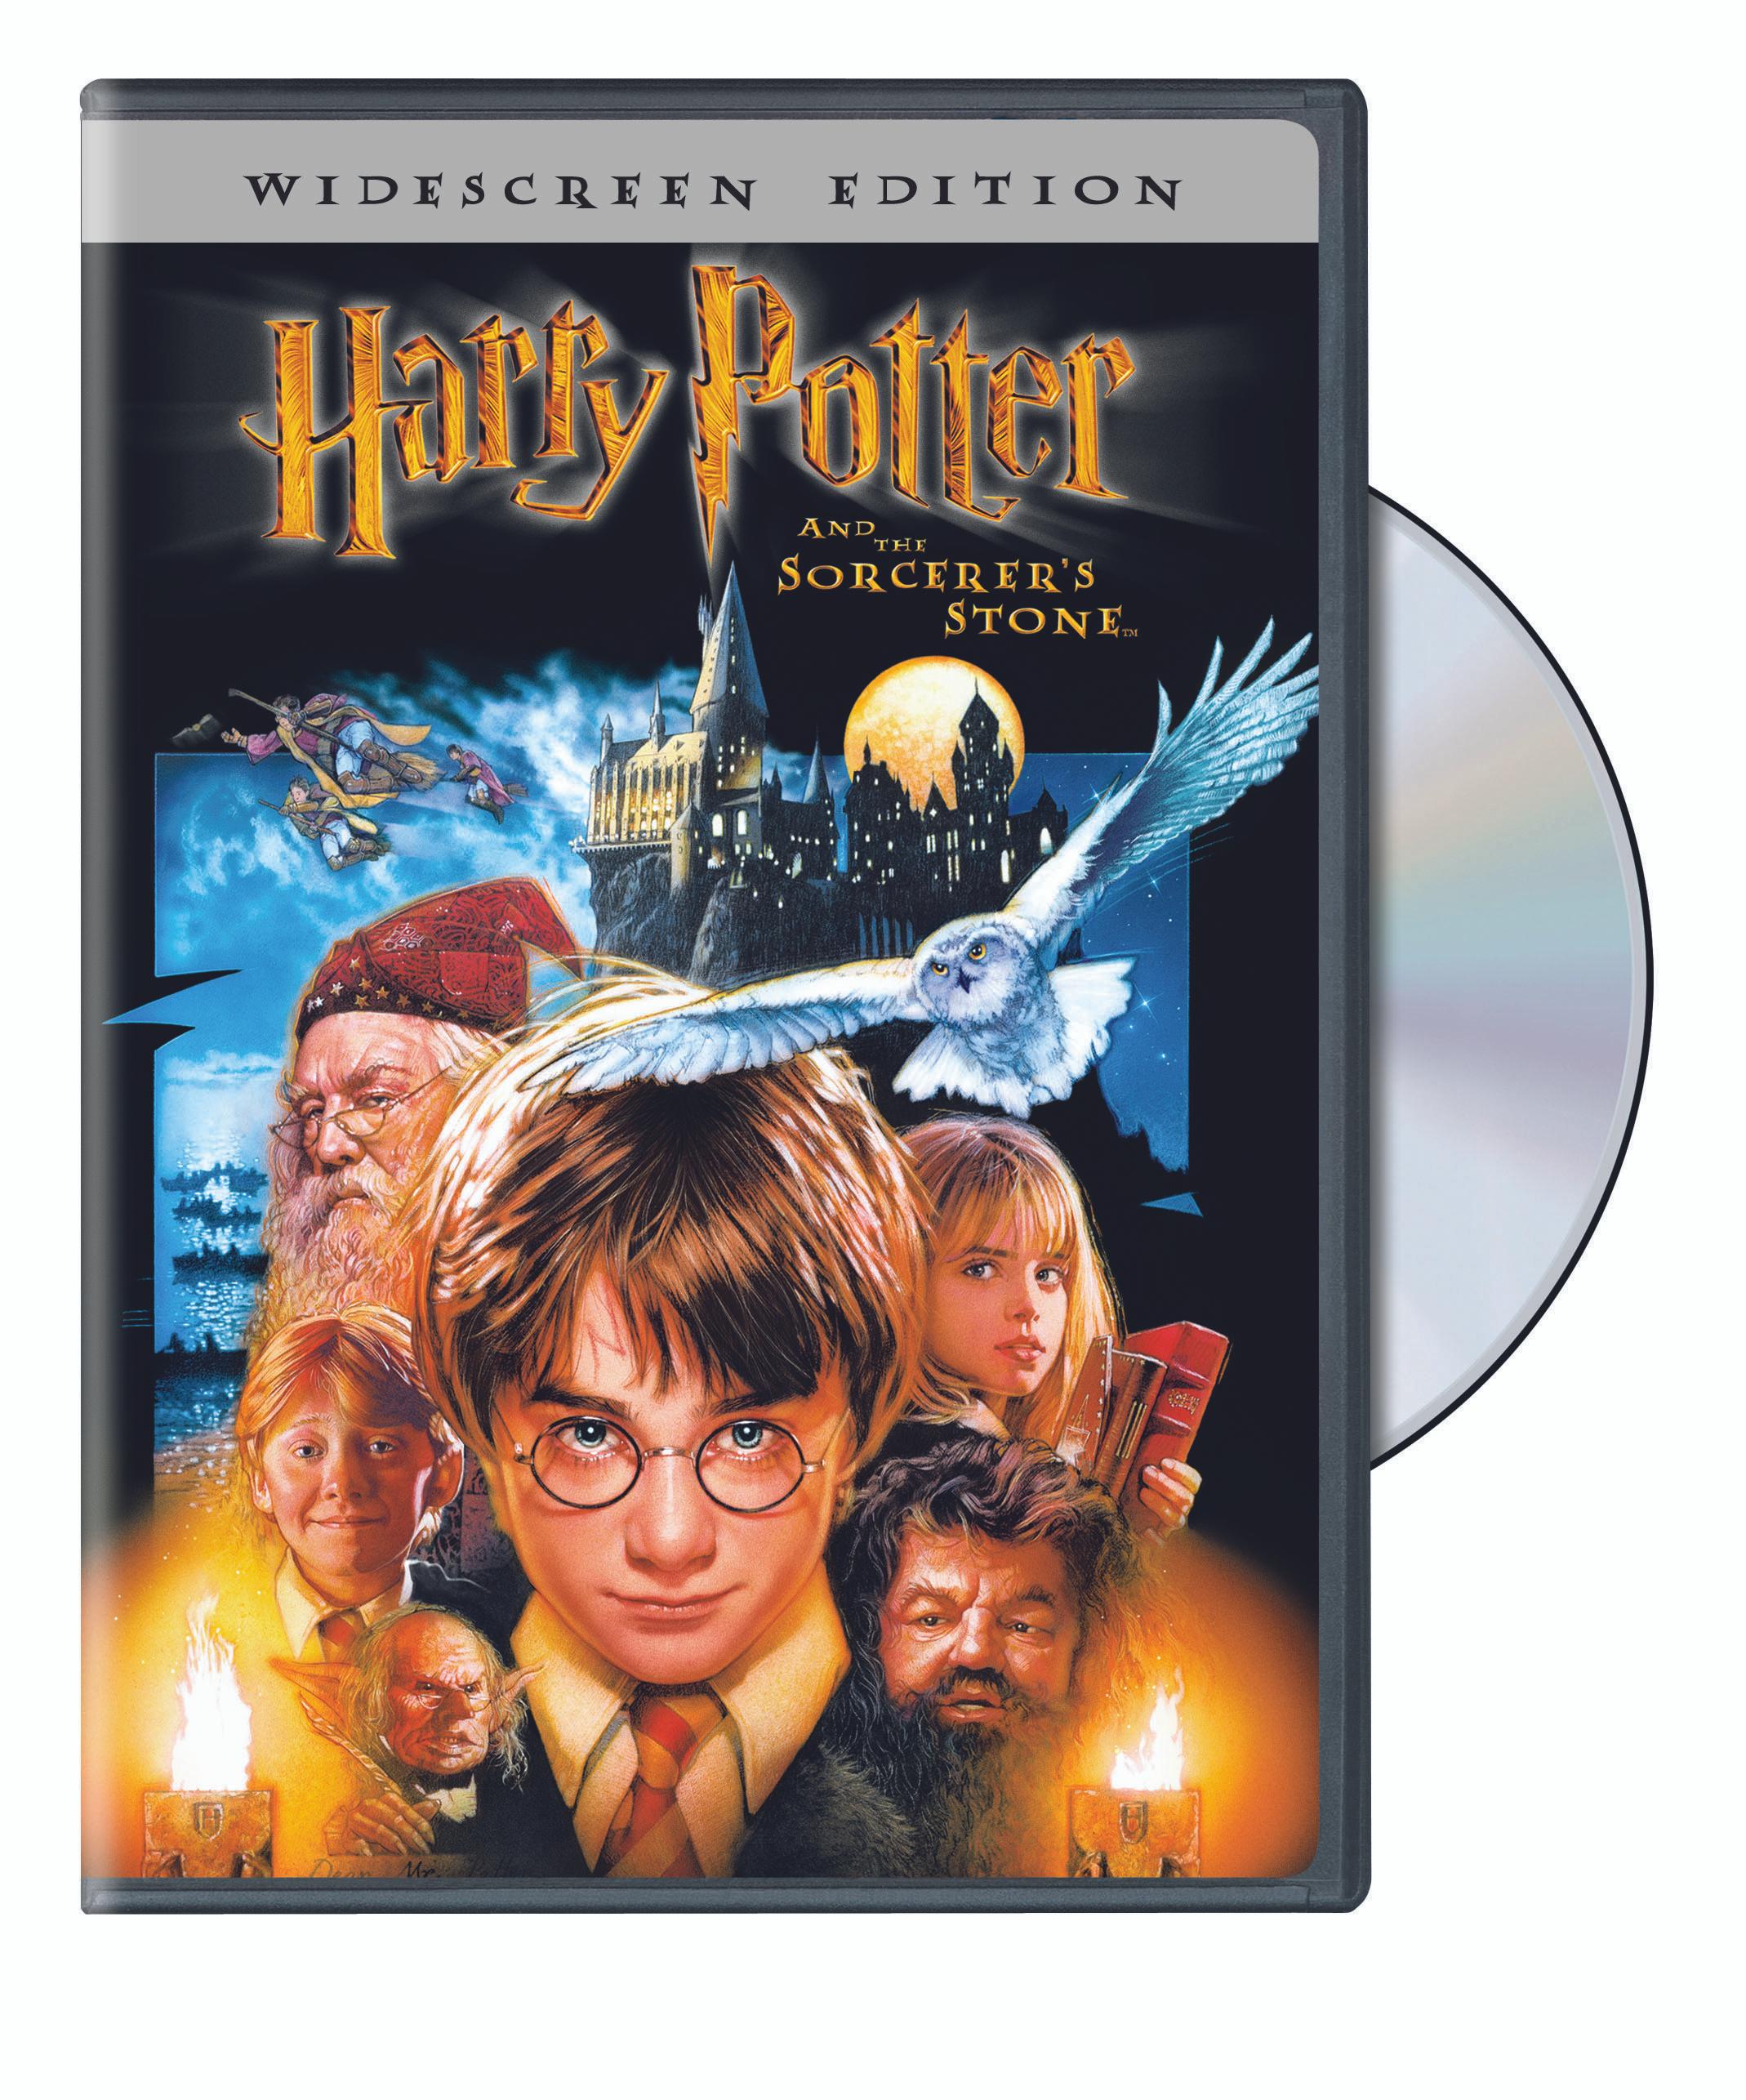 Harry Potter And The Sorcerer's Stone (Widescreen) - DVD [ 2001 ]  - Adventure Movies On DVD - Movies On GRUV